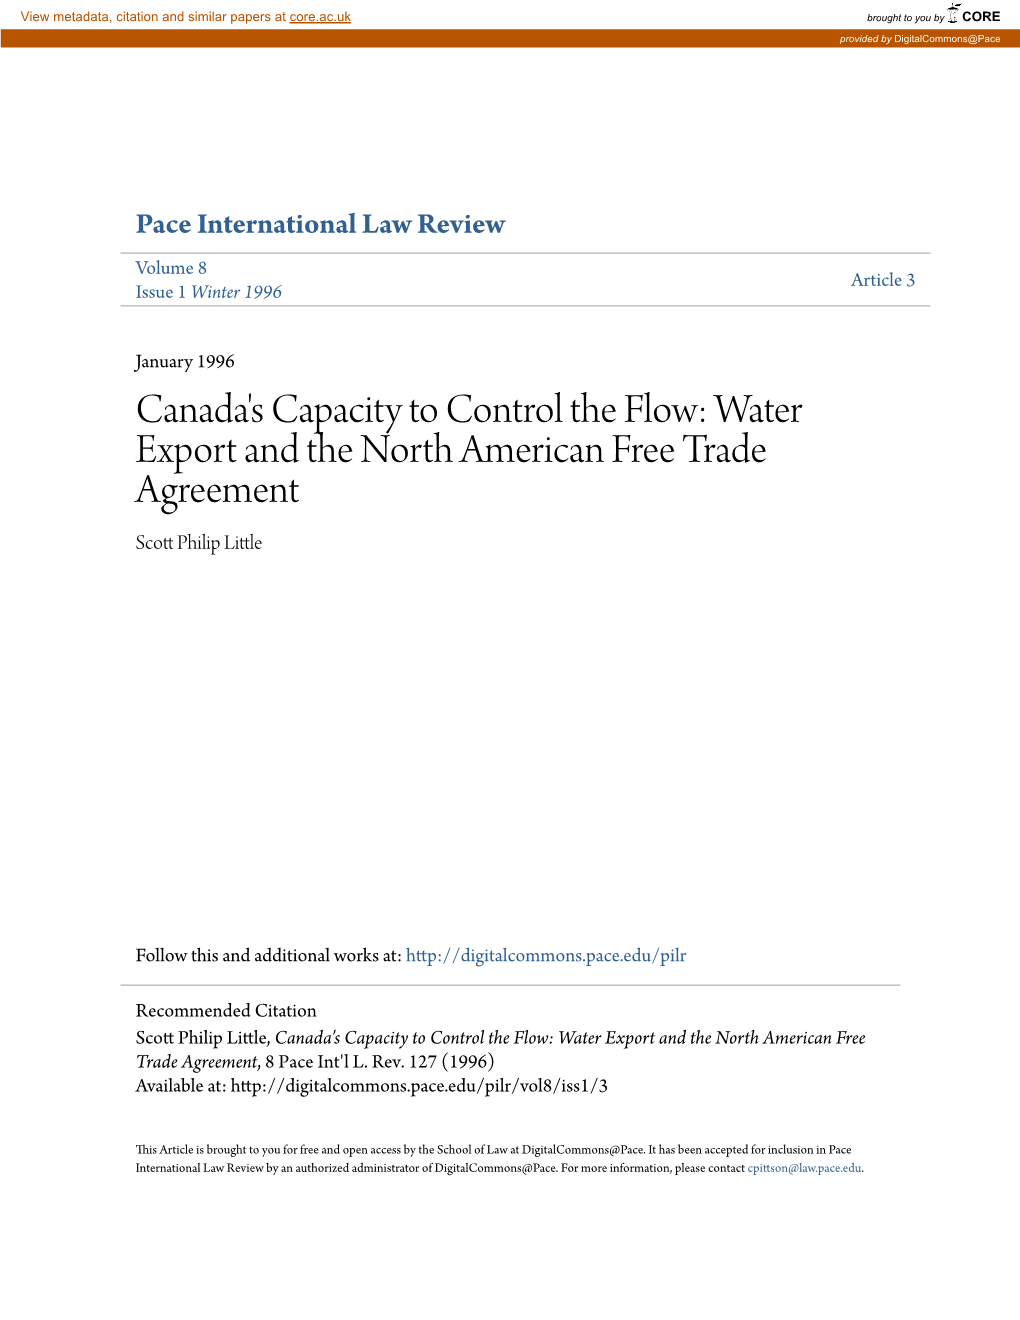 Water Export and the North American Free Trade Agreement Scott Hip Lip Little